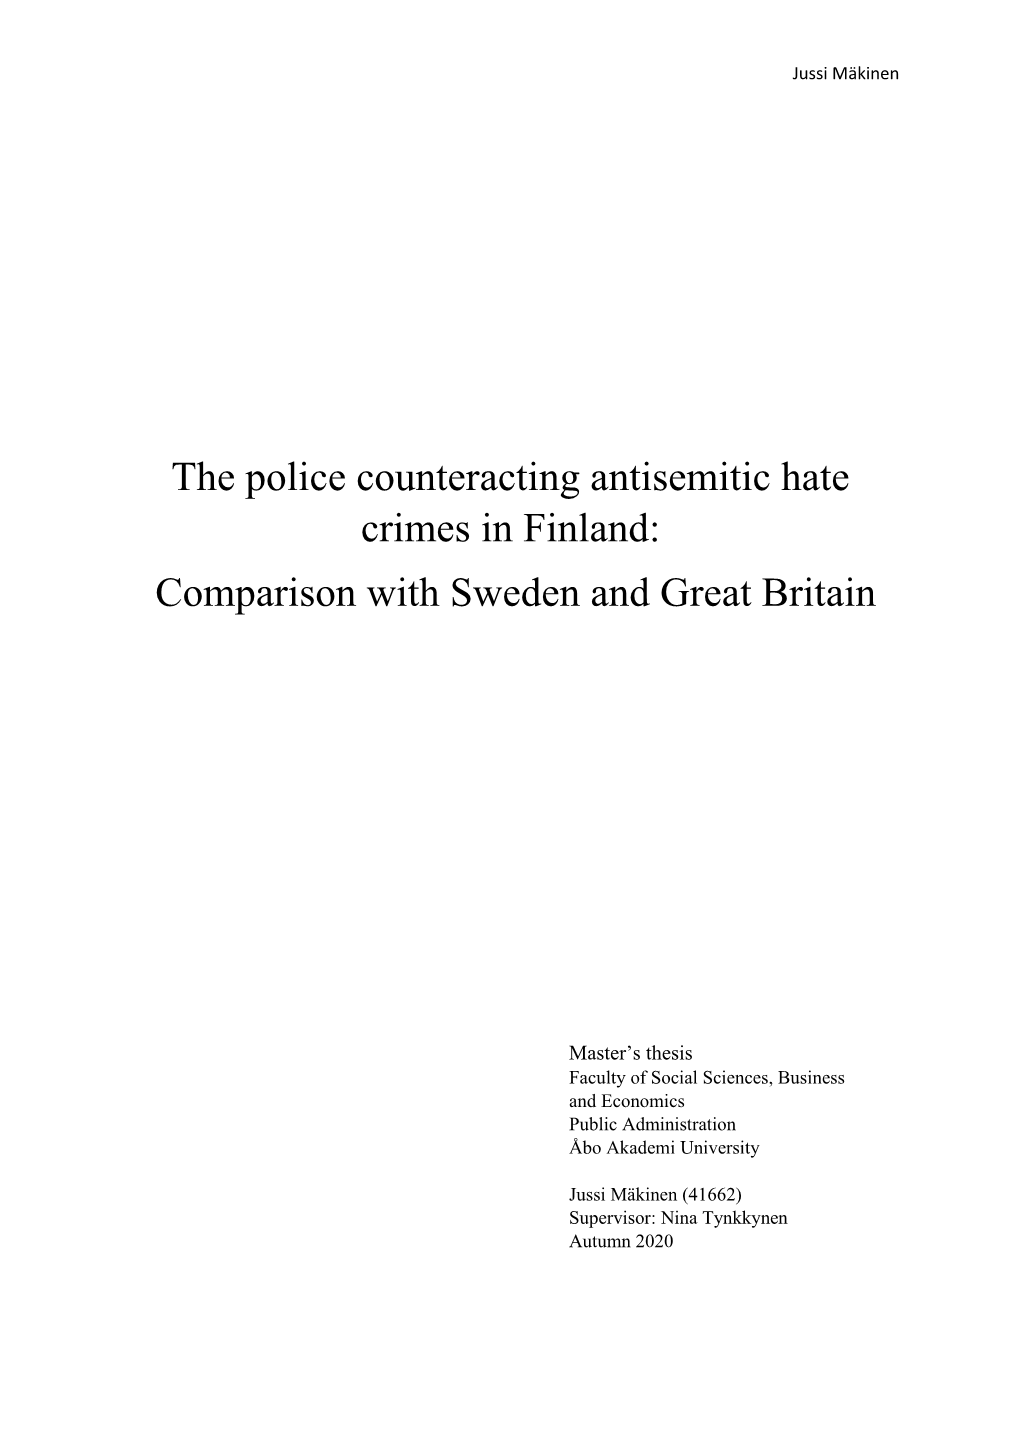 The Police Counteracting Antisemitic Hate Crimes in Finland: Comparison with Sweden and Great Britain